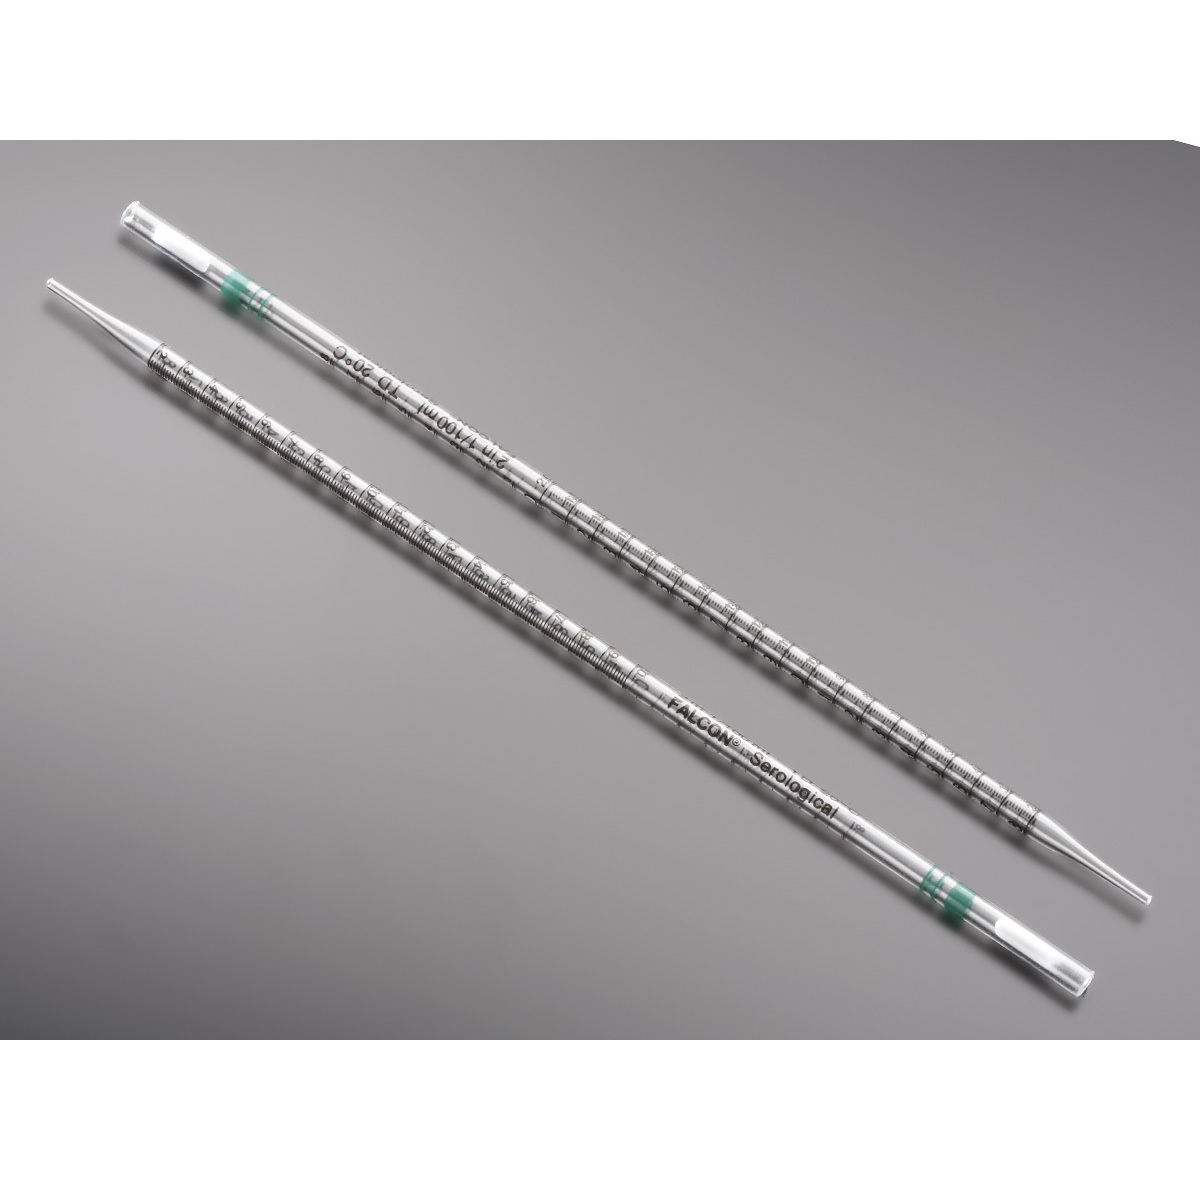 Falcon® 2 mL Serological Pipet, Polystyrene, 0.01 Increments, Sterile